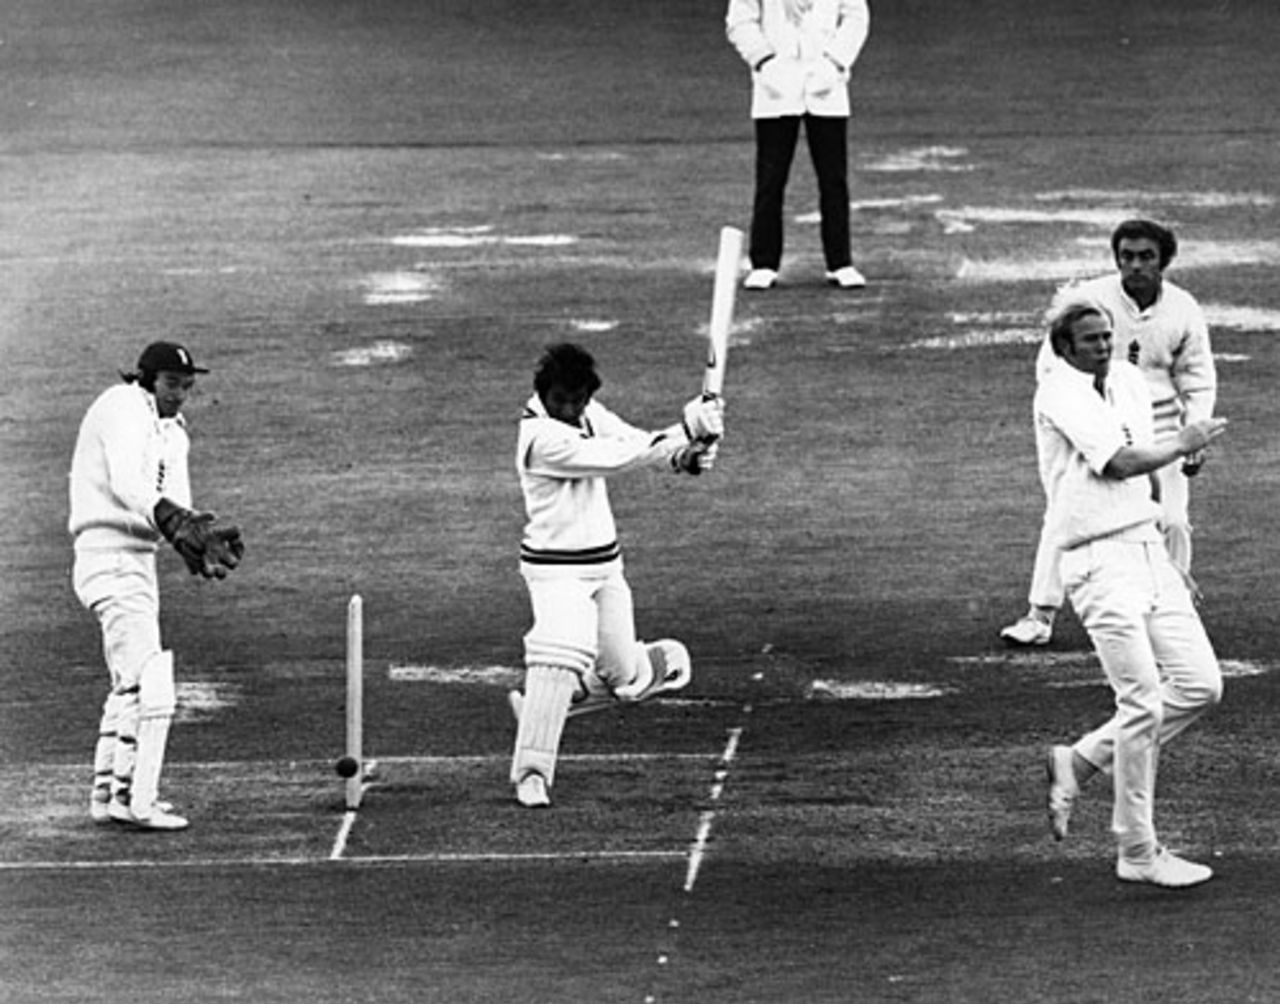 Sunil Gavaskar hits a cracking shot on his way to a century, England v India, 1st Test, Old Trafford, 3rd day, June 8, 1974